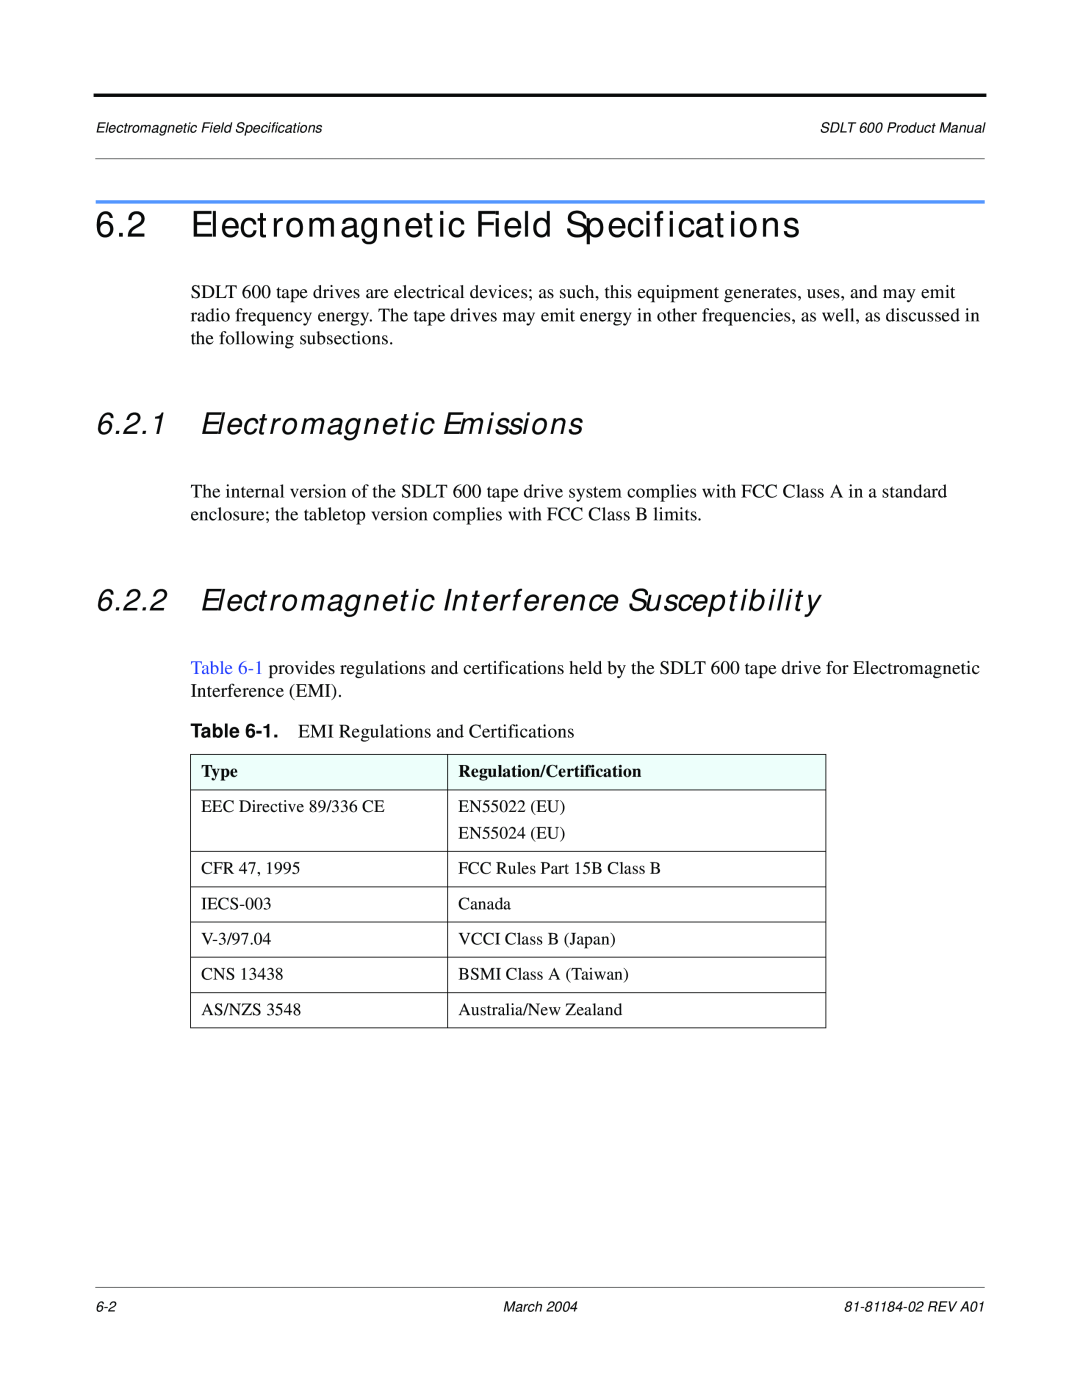 Tandberg Data 600 manual Electromagnetic Field Specifications, Electromagnetic Emissions 